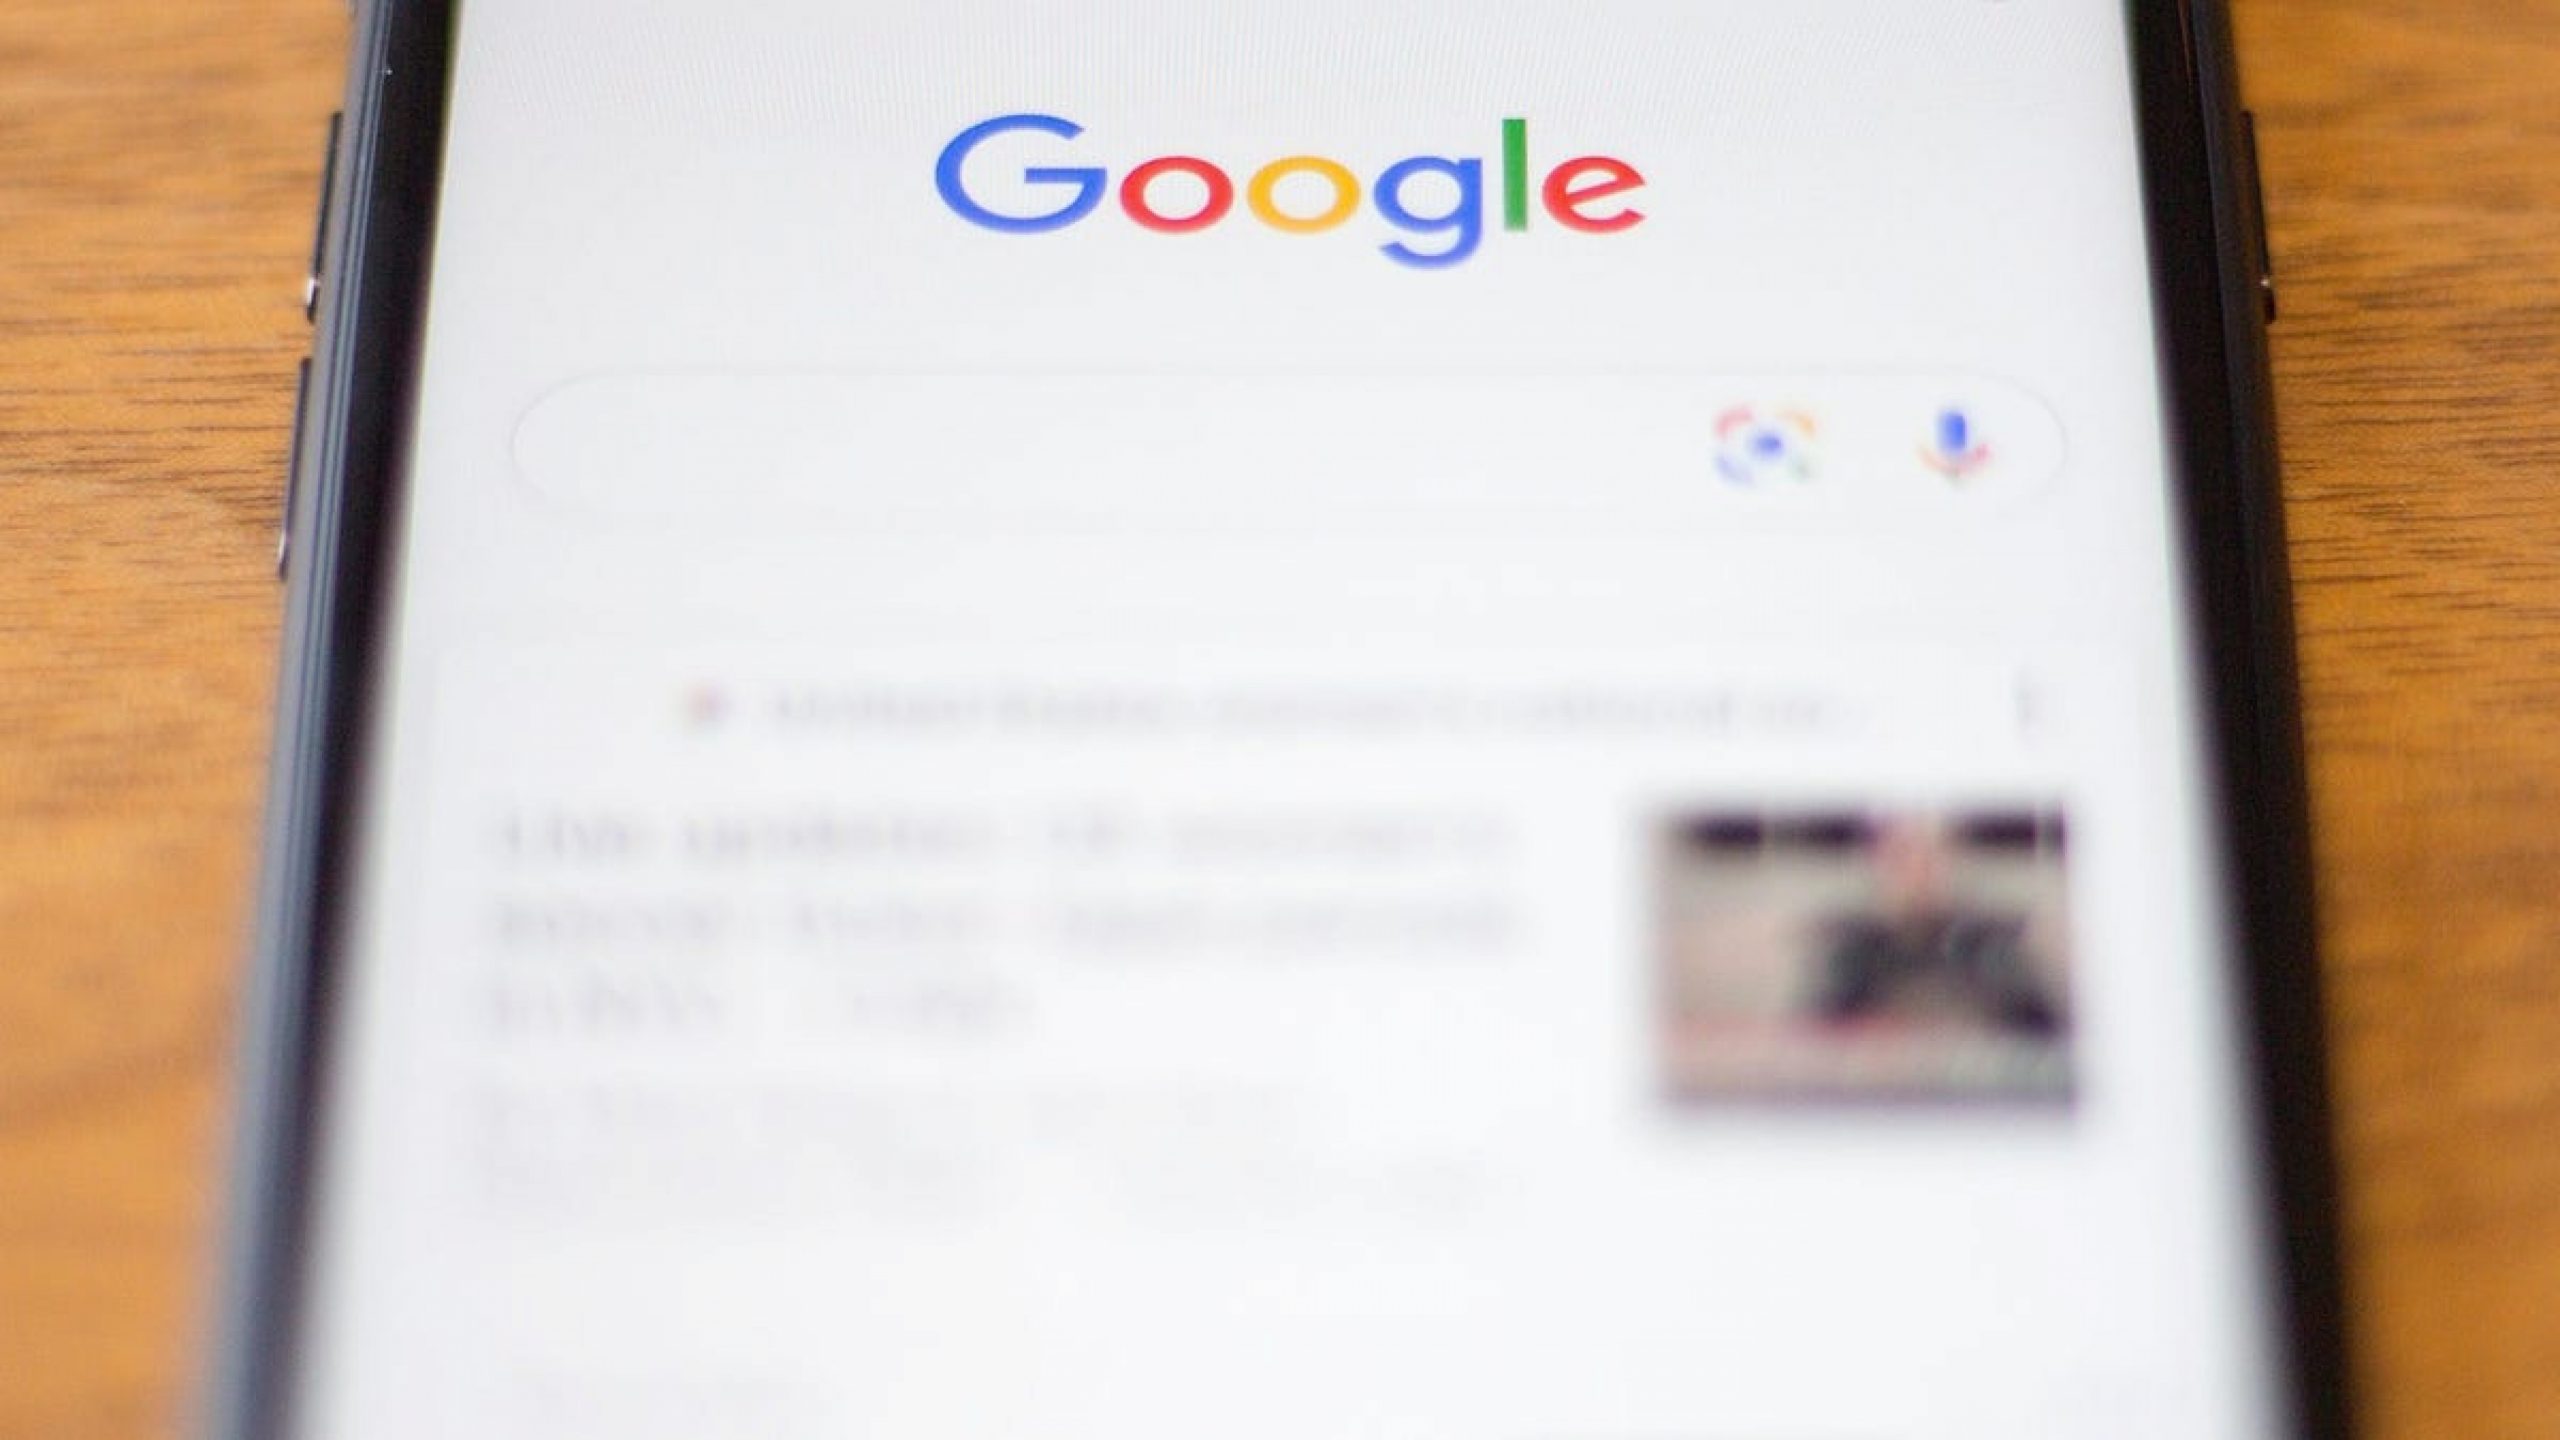 Google’s Search Engine Will Now Warn You When It Doesn’t Have a Reliable Answer